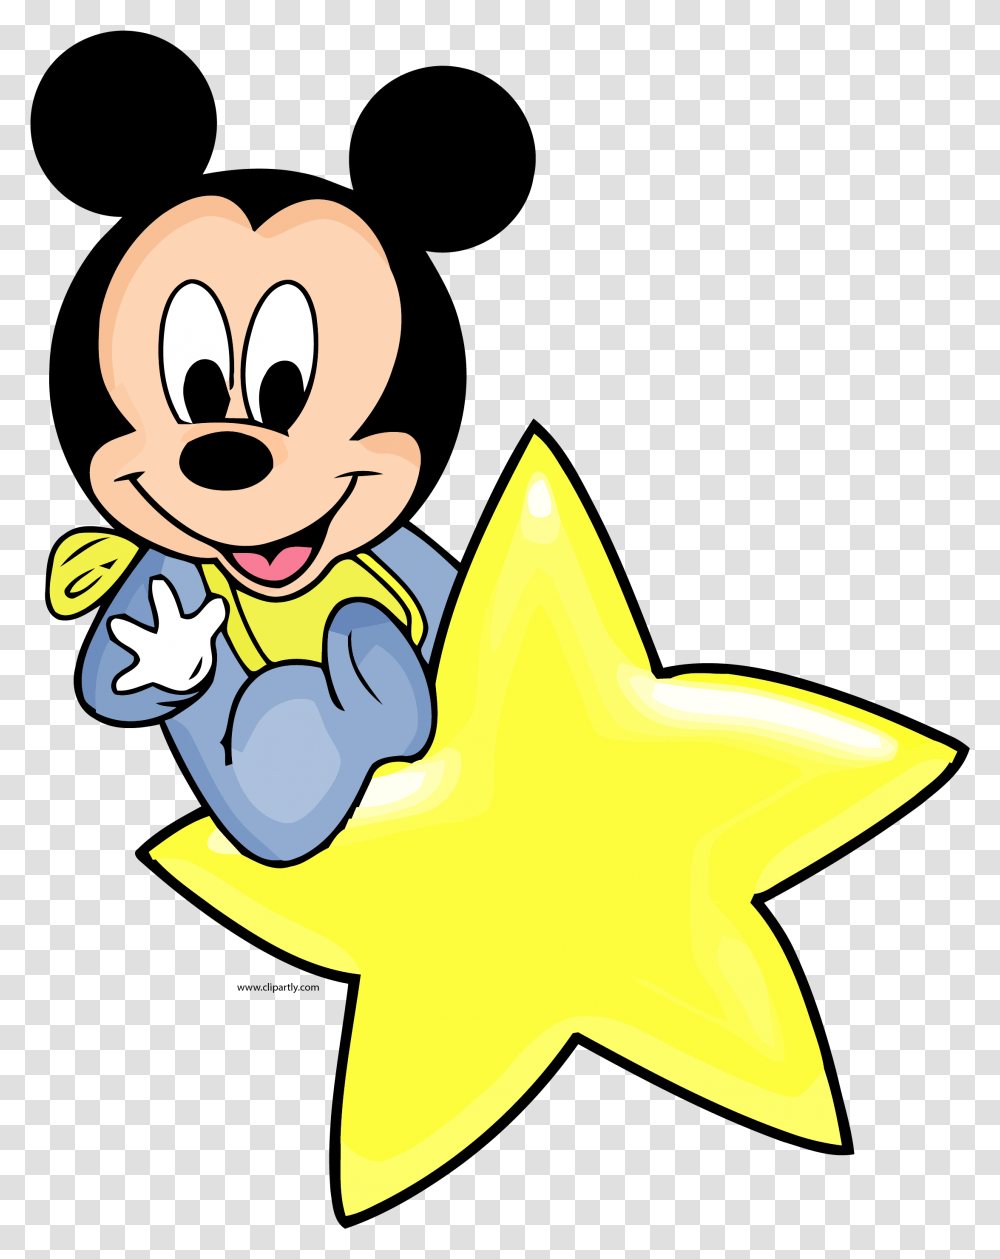 Baby Mickey Mouse Cake Minnie Images Mickey Baby Mickey Mouse Star, Symbol, Star Symbol, Animal, Elf Transparent Png